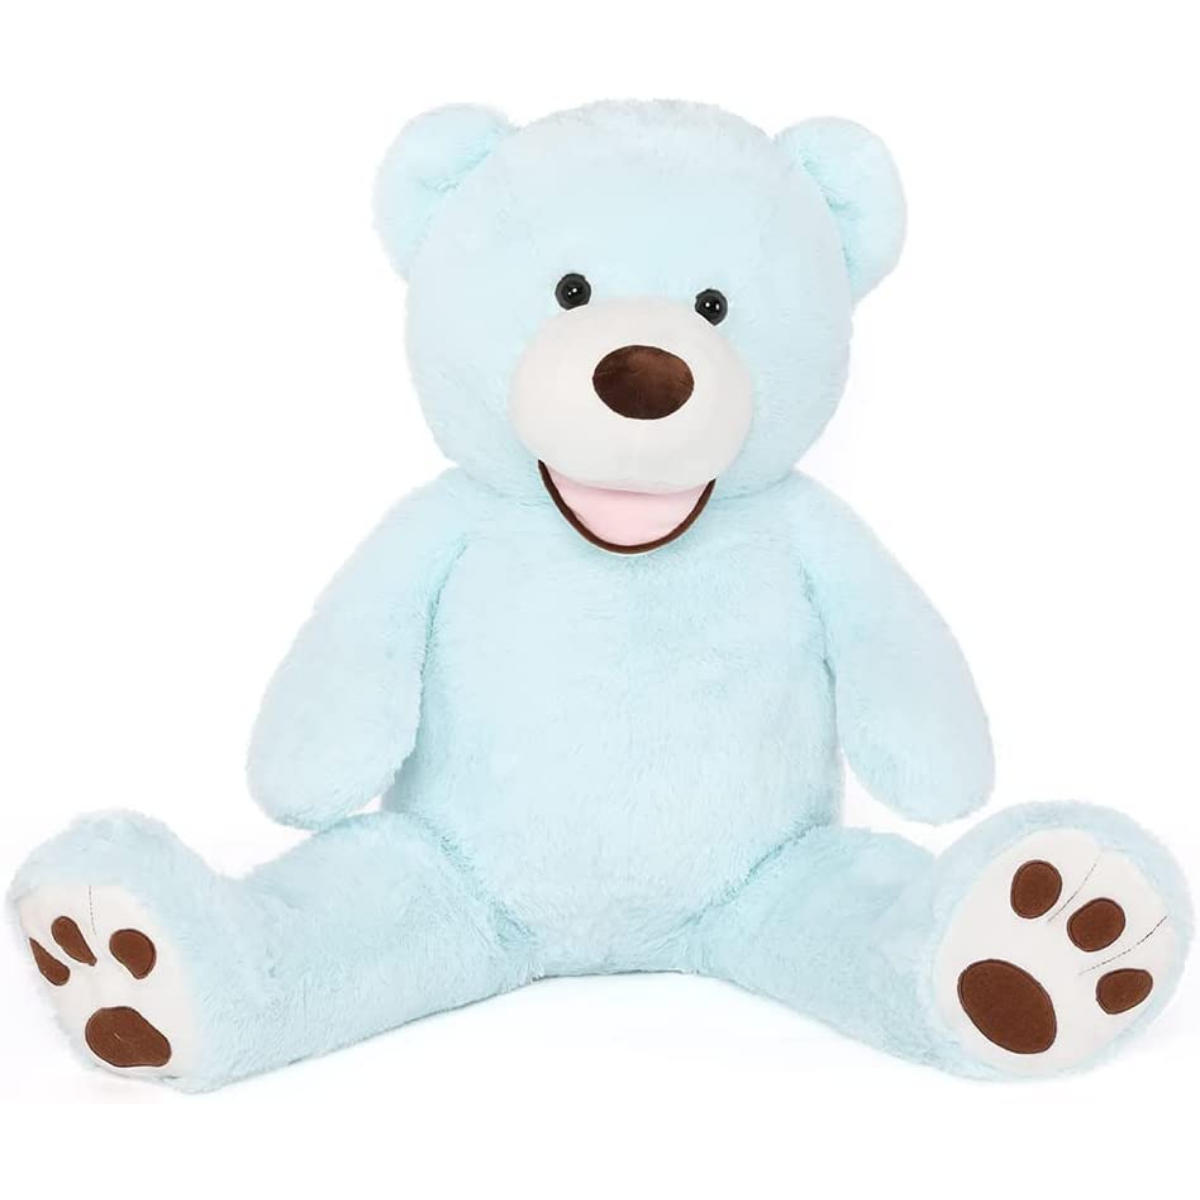 Smile Teddy Bear Plush Toy, Multicolor, 39/51/59/71 Inches